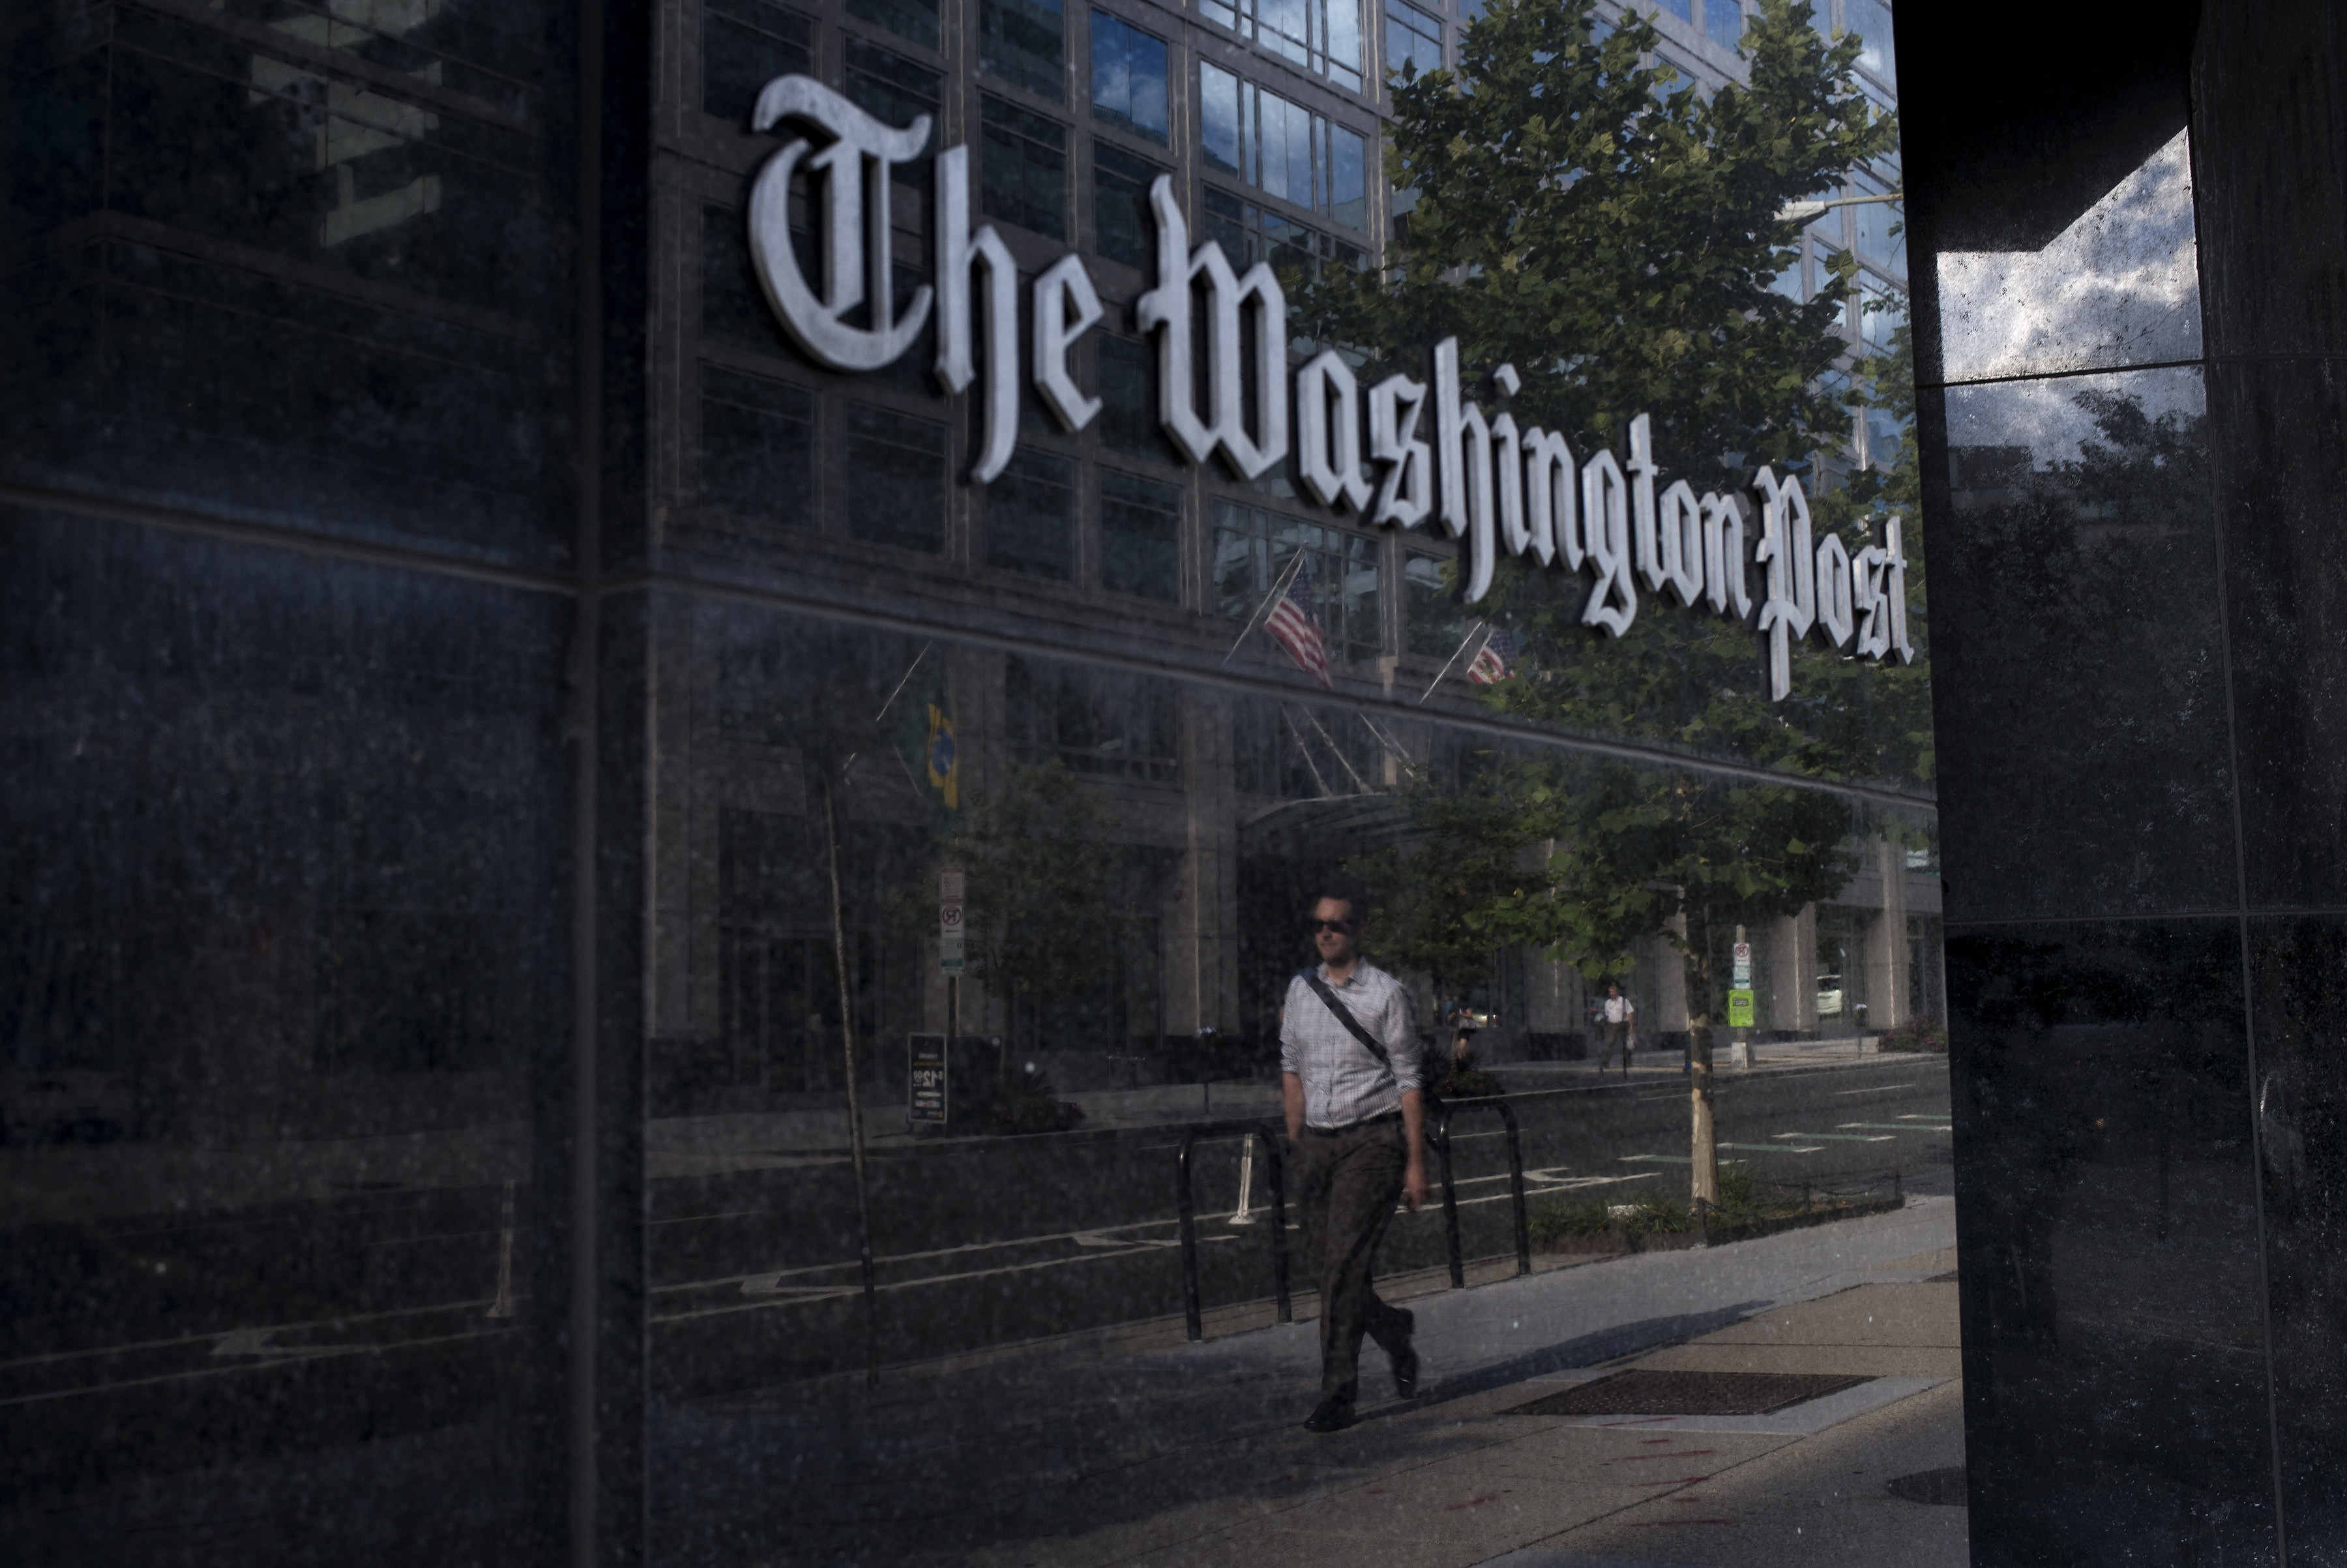 A man walks past The Washington Post on August 5, 2013 in Washington, DC after it was announced that Amazon.com founder and CEO Jeff Bezos had agreed to purchase the Post for USD 250 million. (BRENDAN SMIALOWSKI/AFP/Getty Images)